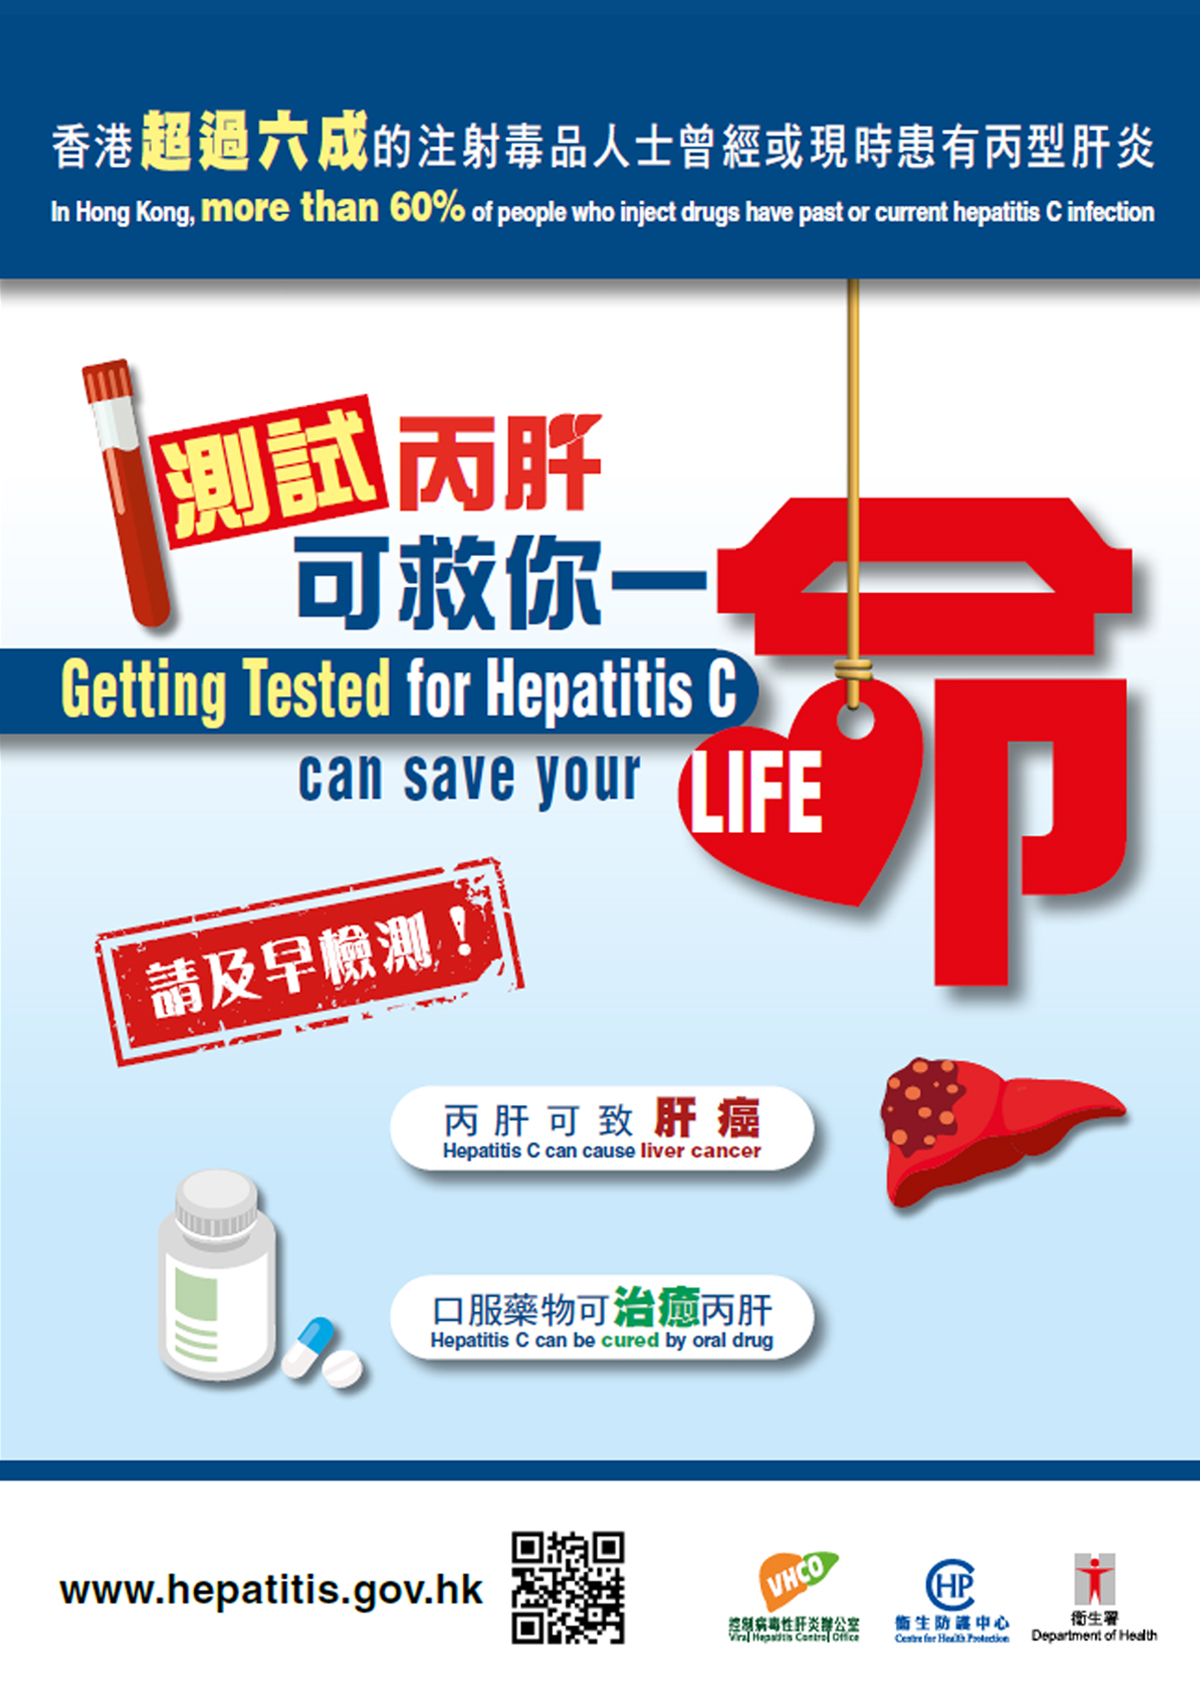 “Getting tested for hepatitis C can save your life” poster